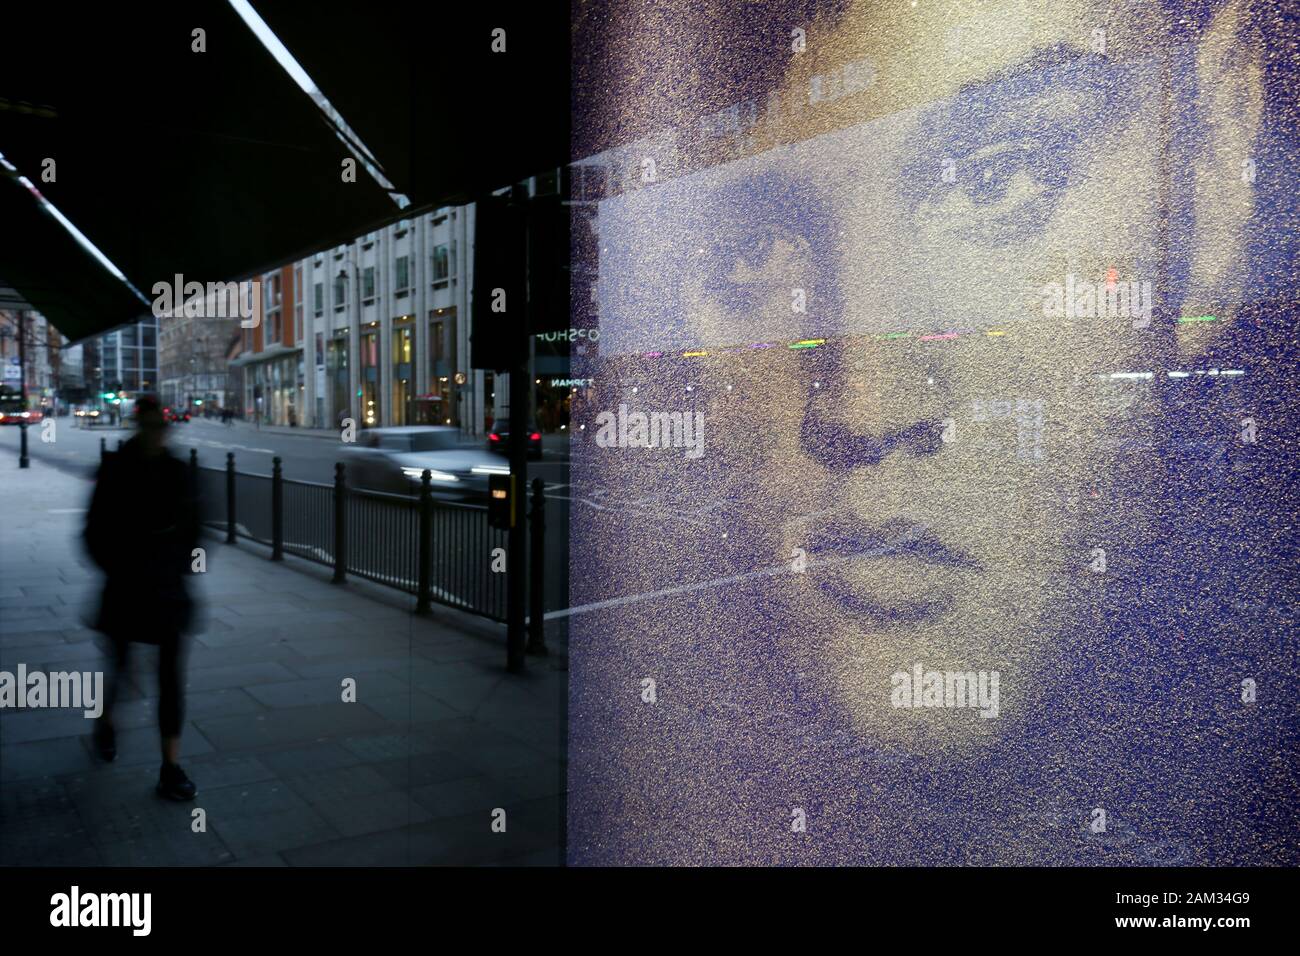 Pedestrians and traffic are reflected in a shop window display of a diamond dust portrait of Elvis Presley by Russell Young on the Knightsbridge storefront of Harrods, London. Stock Photo